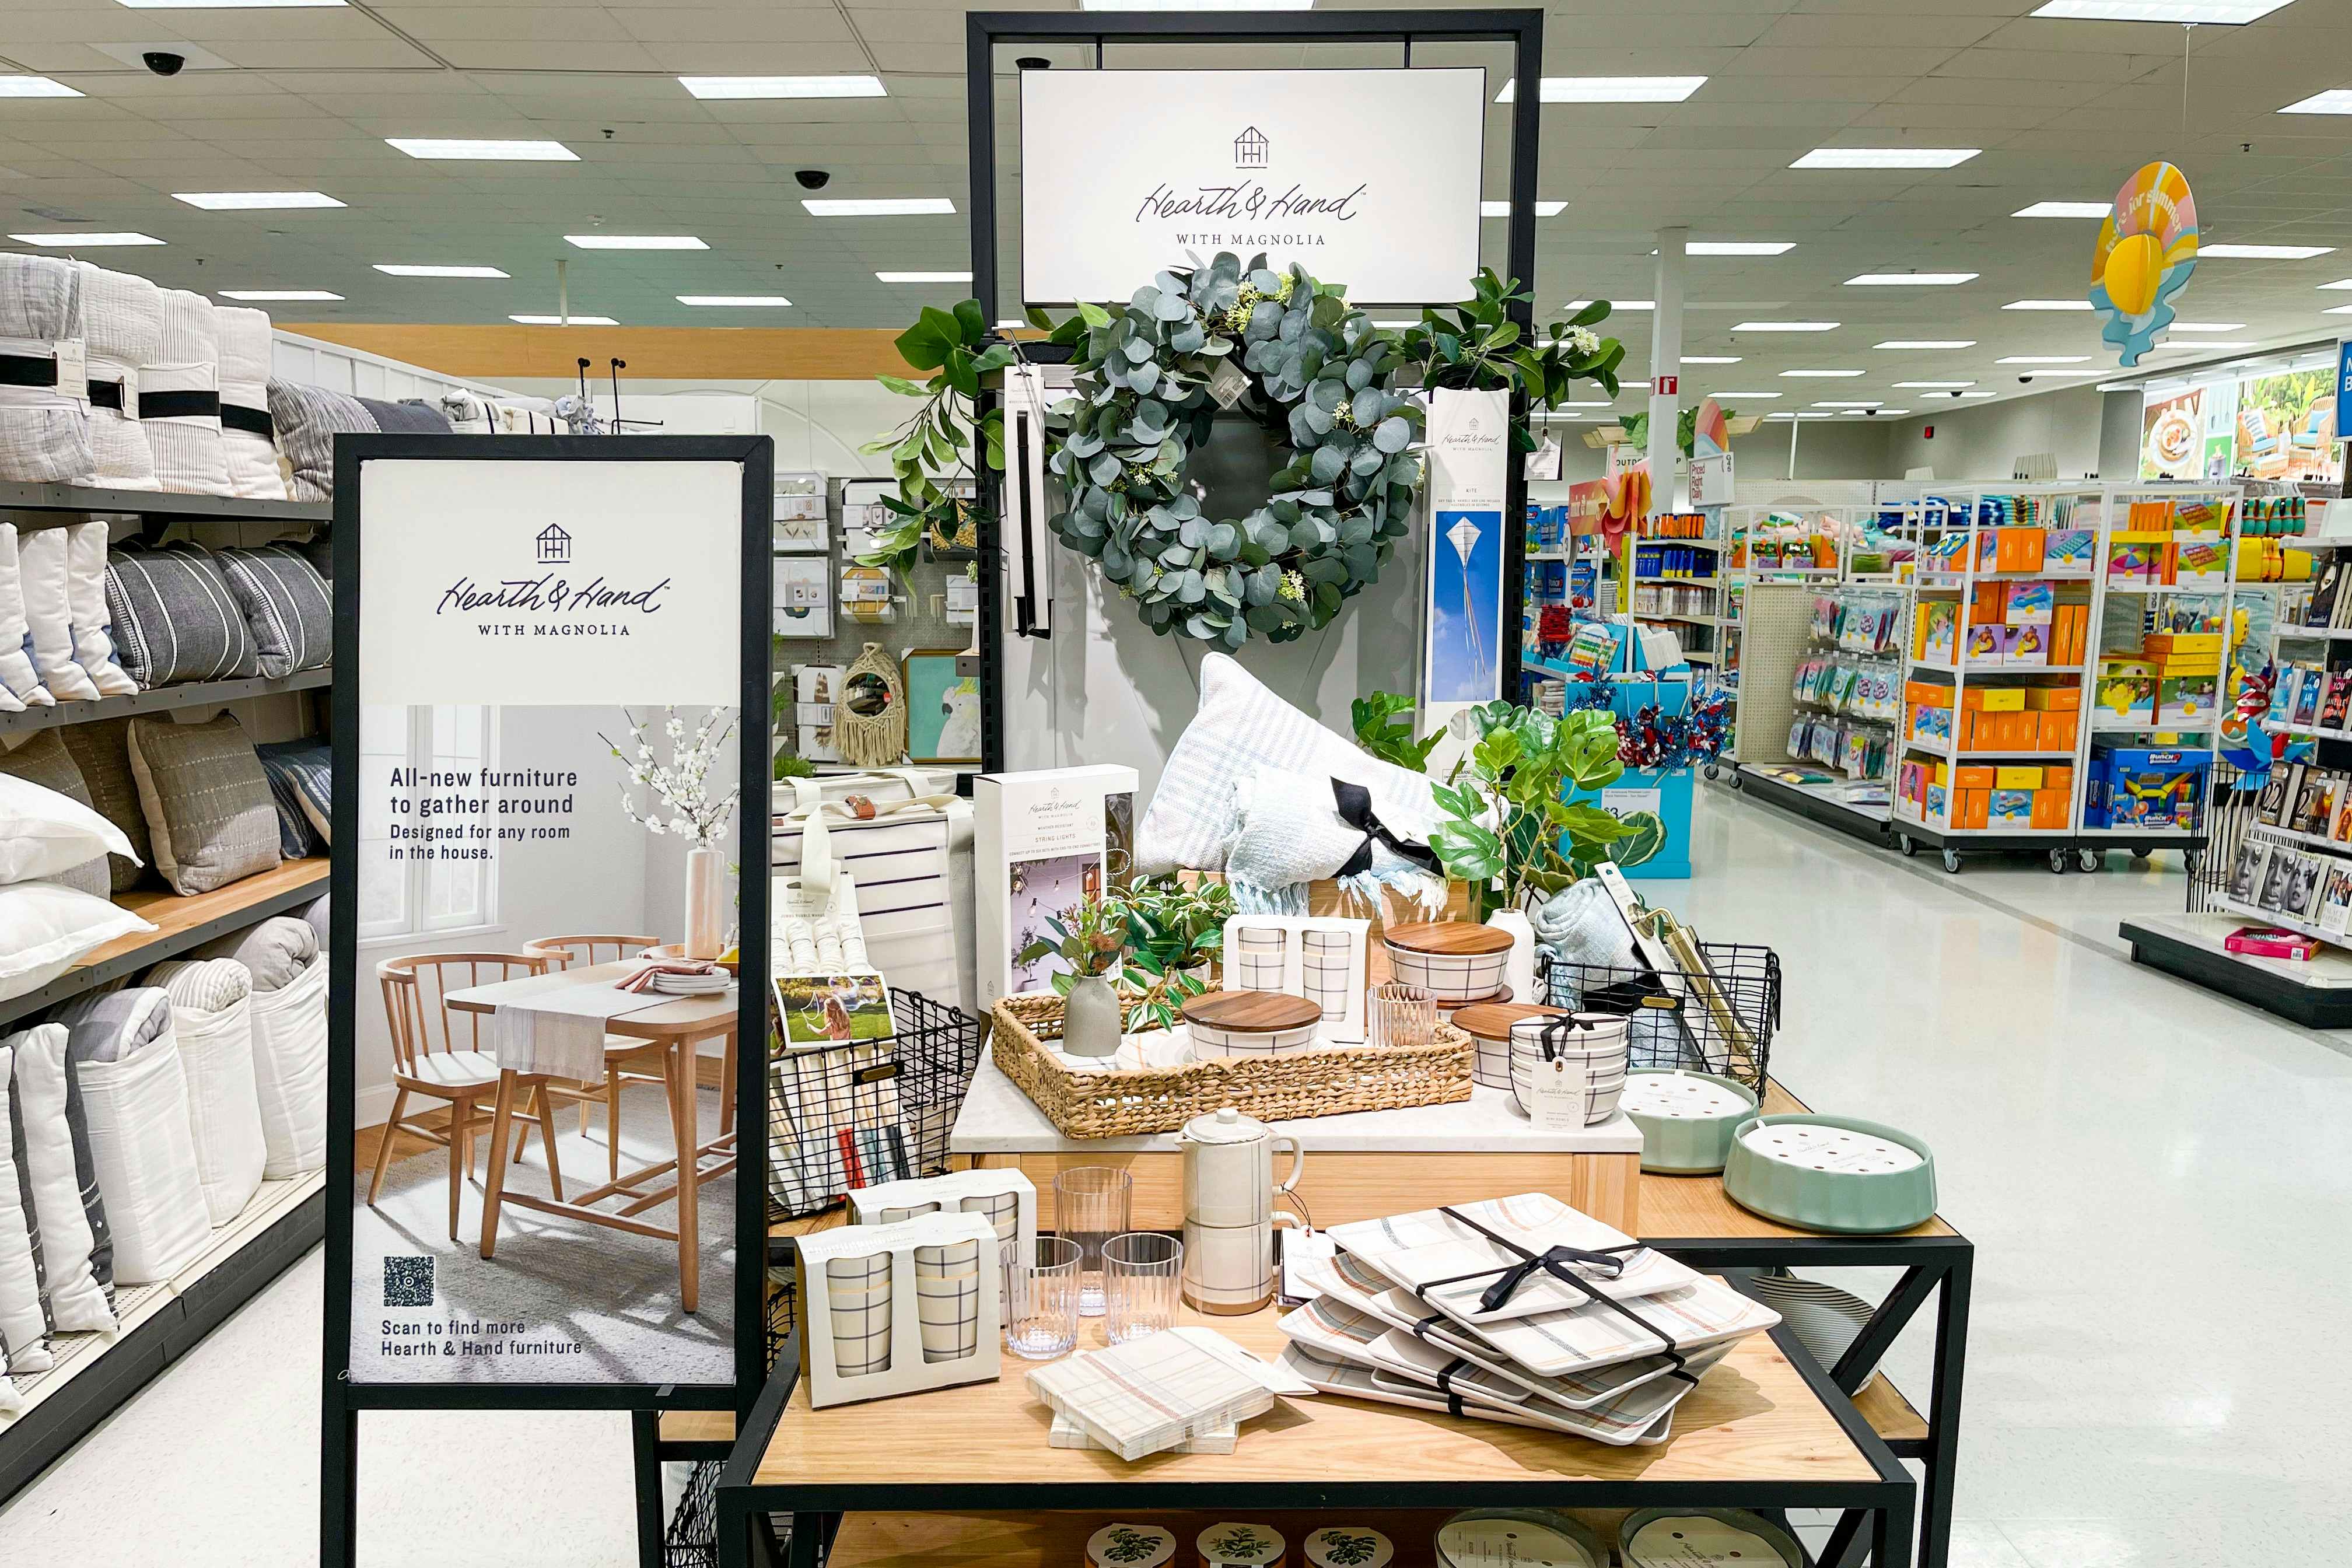 Get 43% Off Joanna Gaines' Magnolia Kitchen Items — As Low as $7 at Target